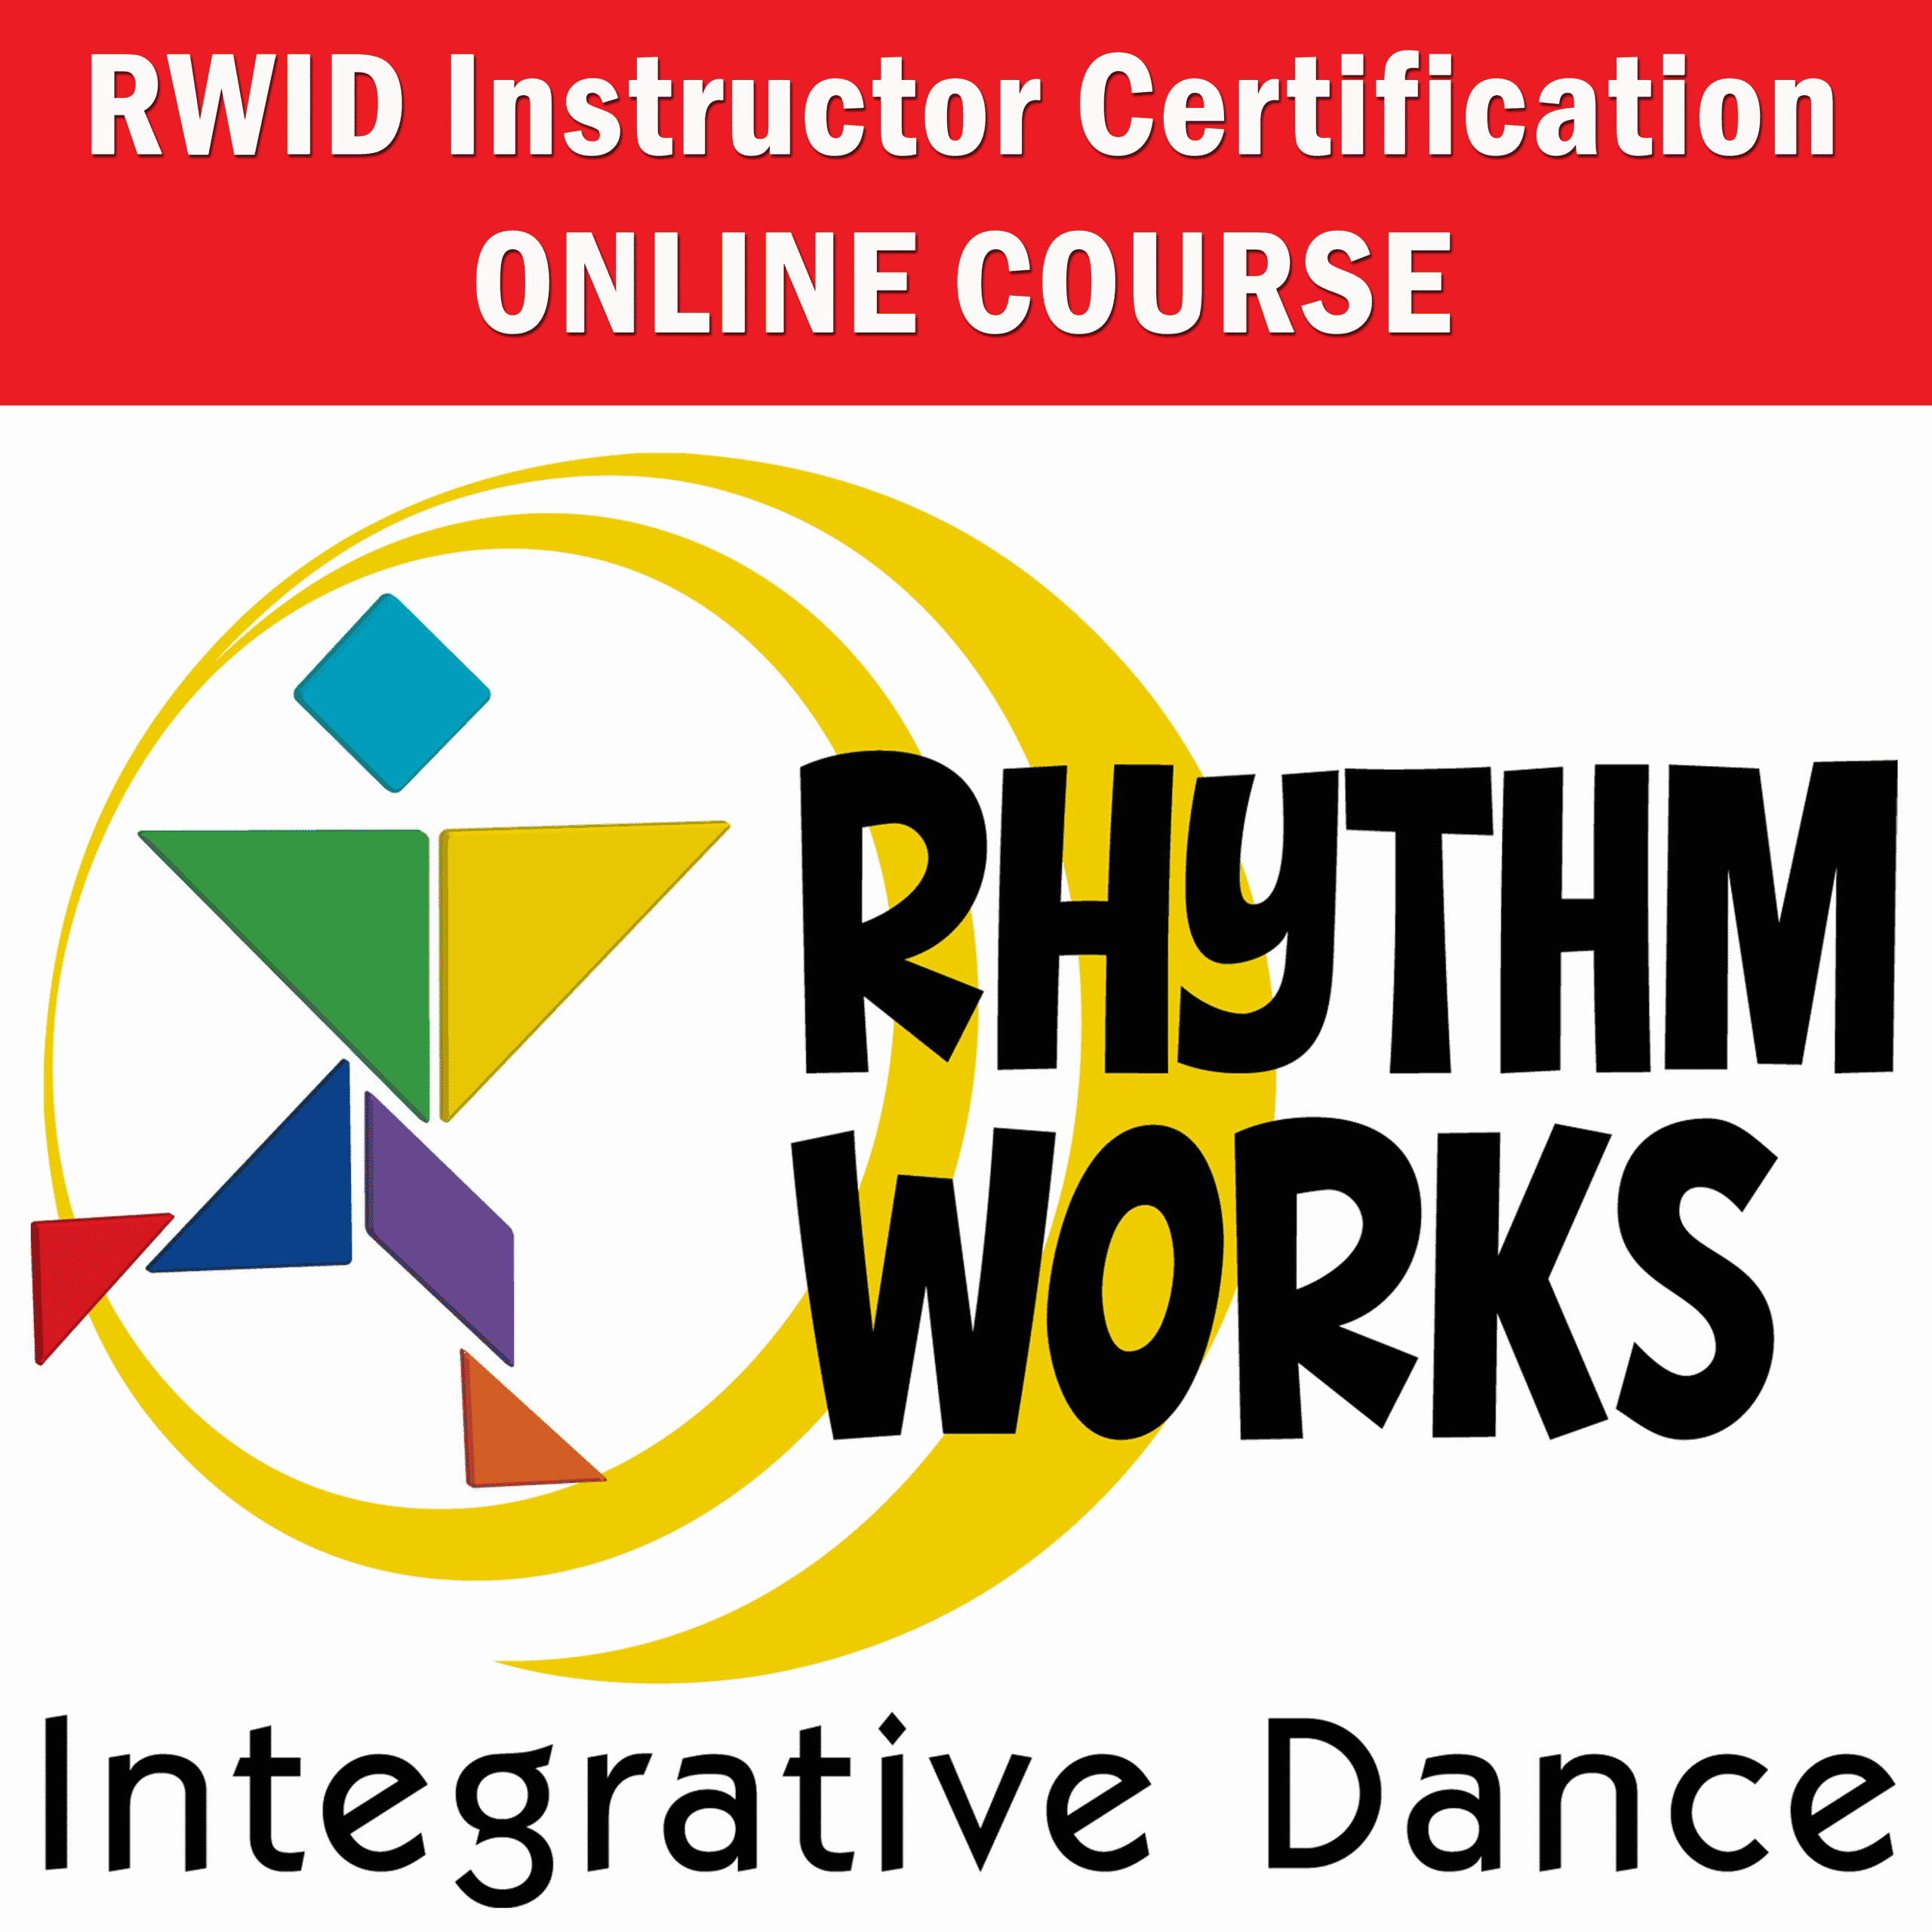 RWID Course Logo with a red bar at the top with the words "RWID Instructor Certification Online Course and the RWID logo